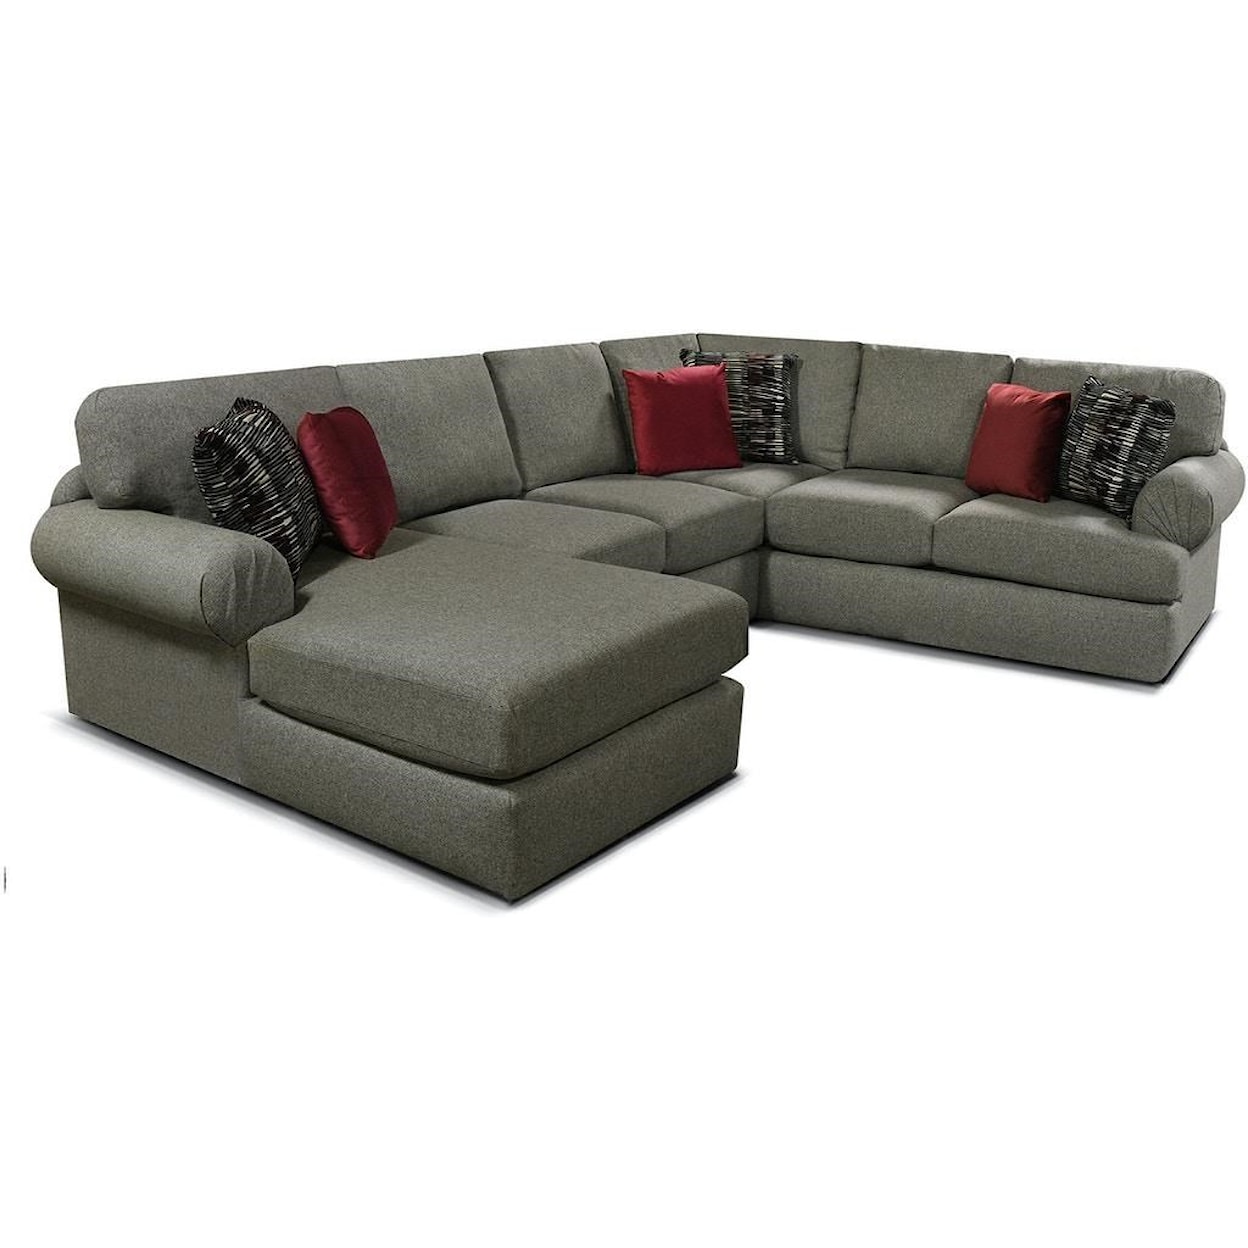 England 8250 Series Sectional with Chaise